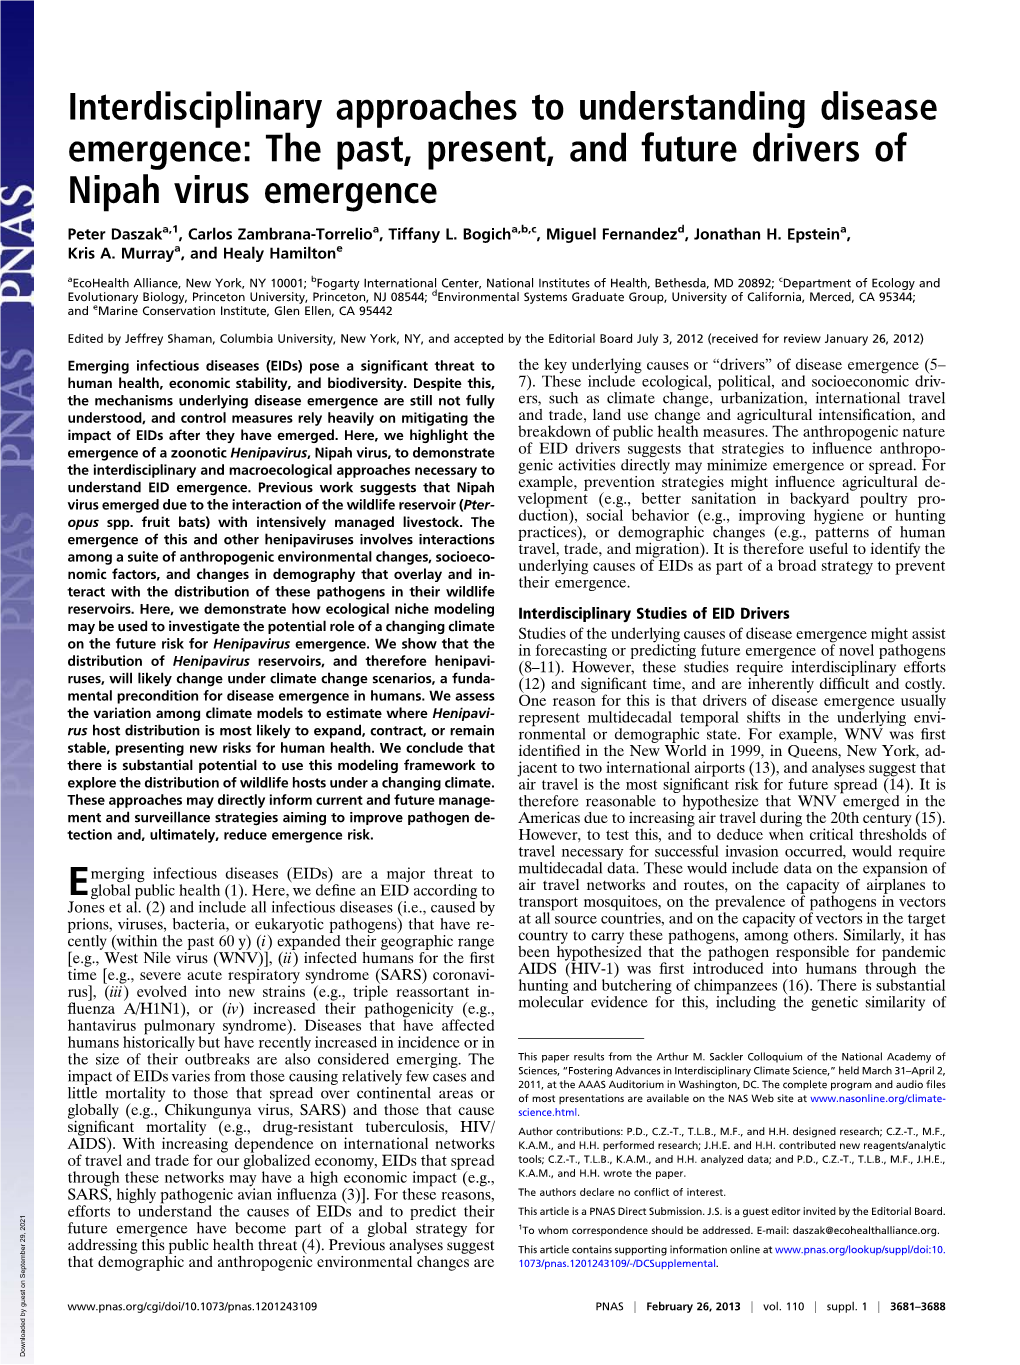 The Past, Present, and Future Drivers of Nipah Virus Emergence